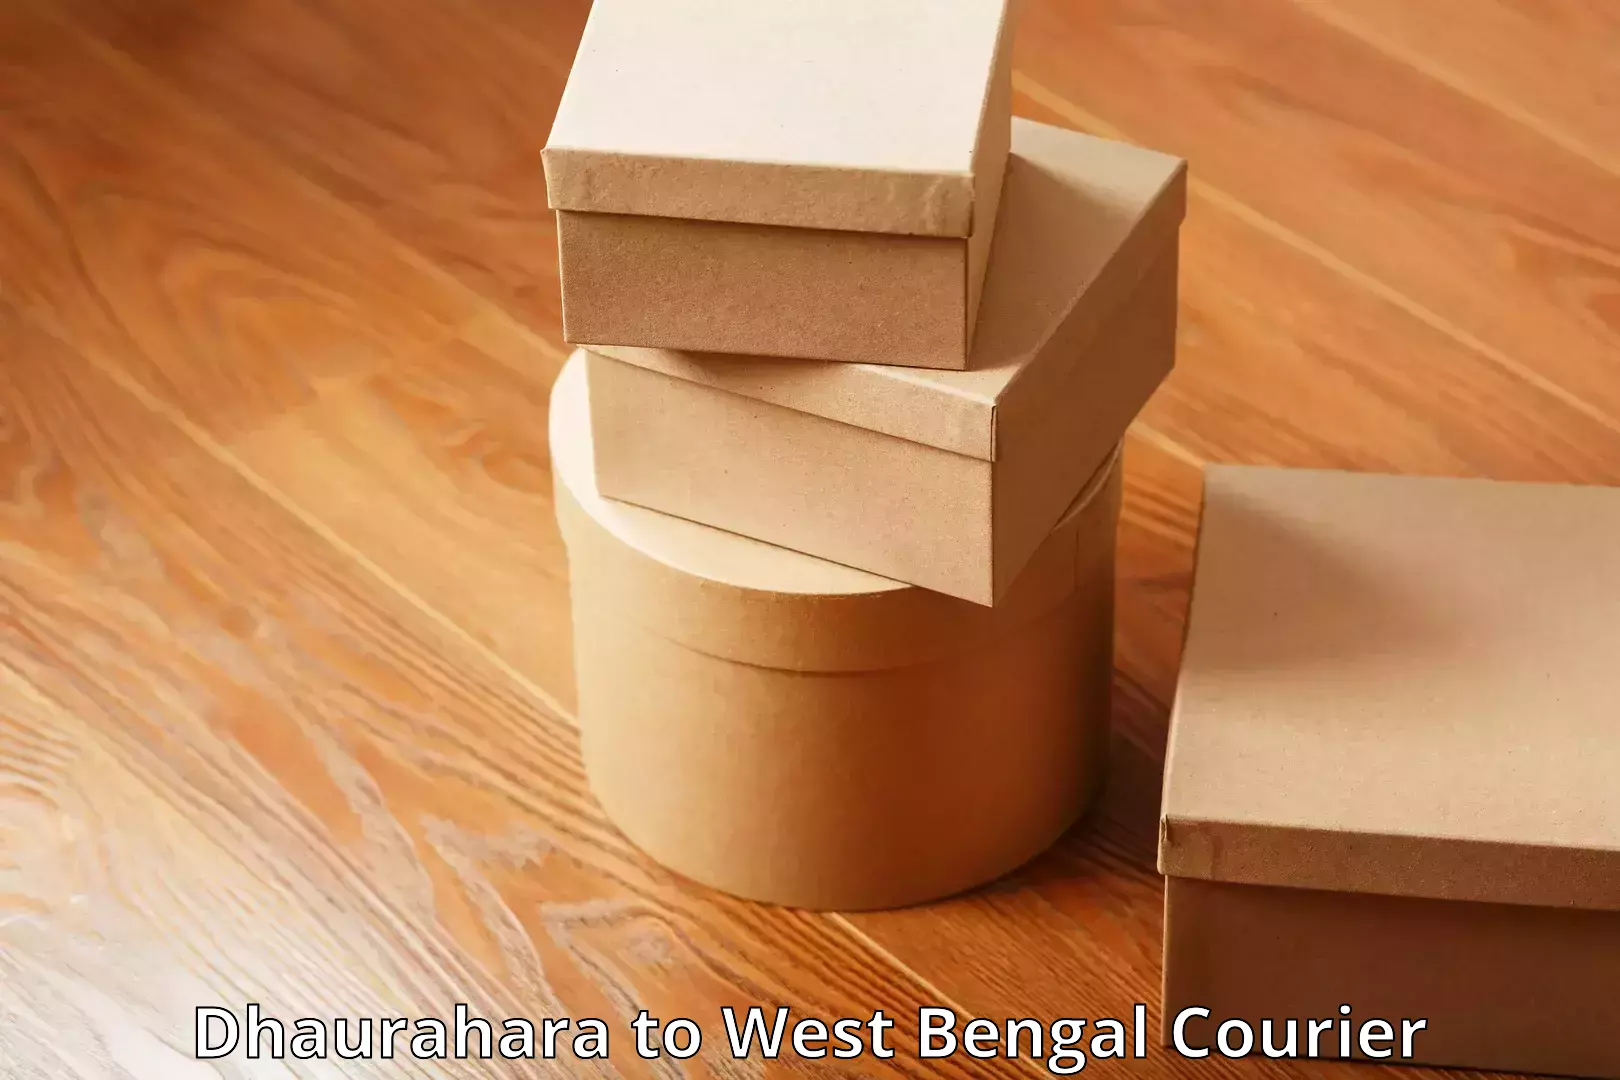 Hotel to Door baggage transport Dhaurahara to West Bengal